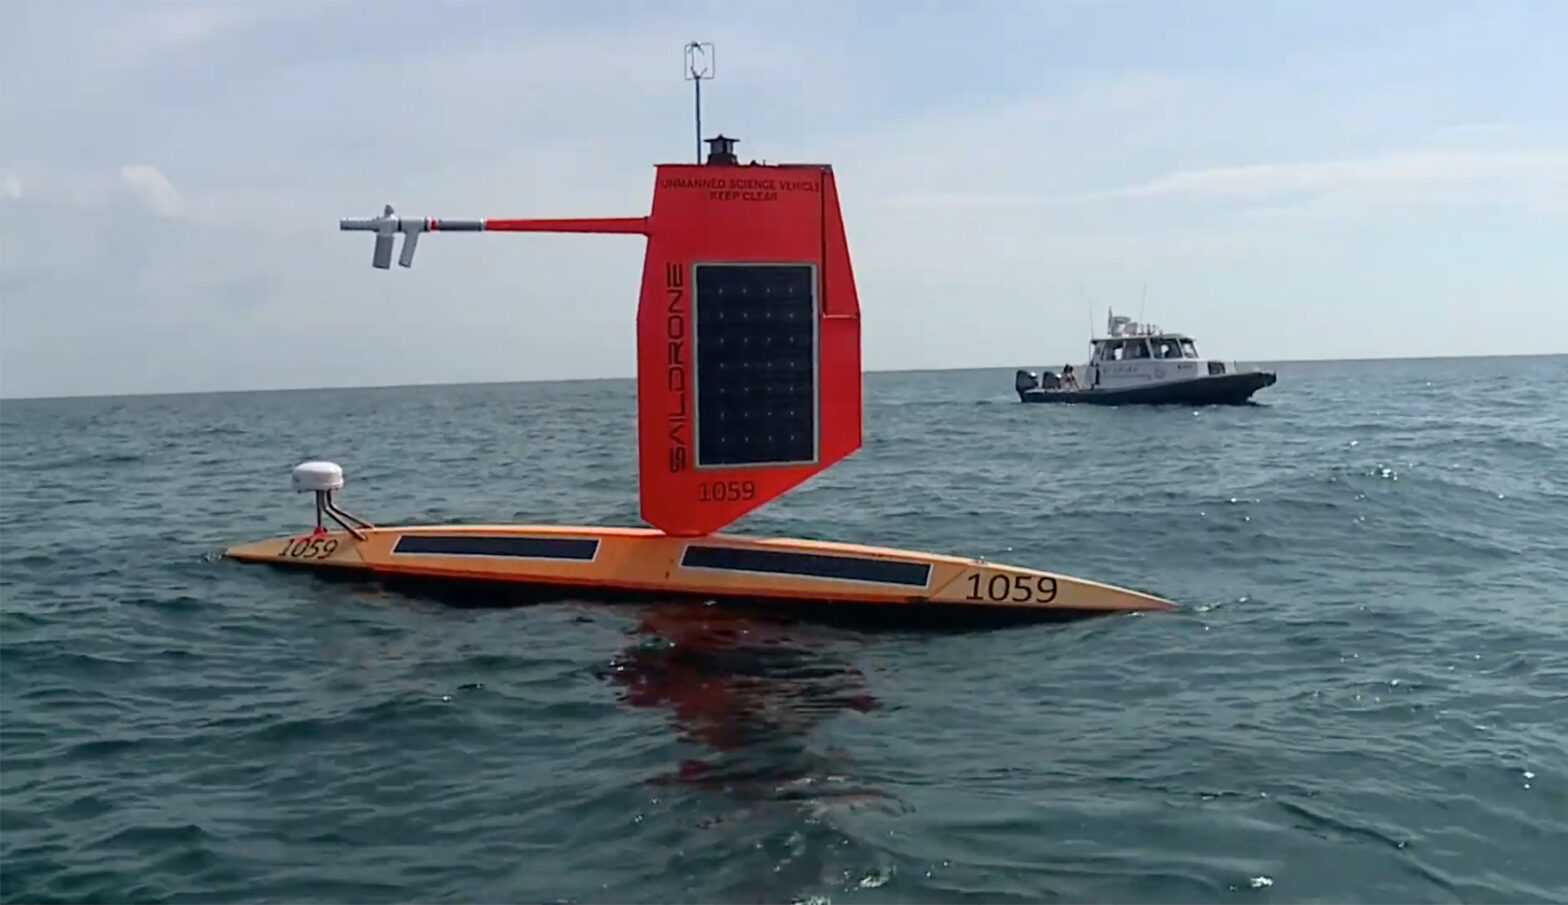 Skidaway gliders join forces with Saildrones to improve hurricane forecasting